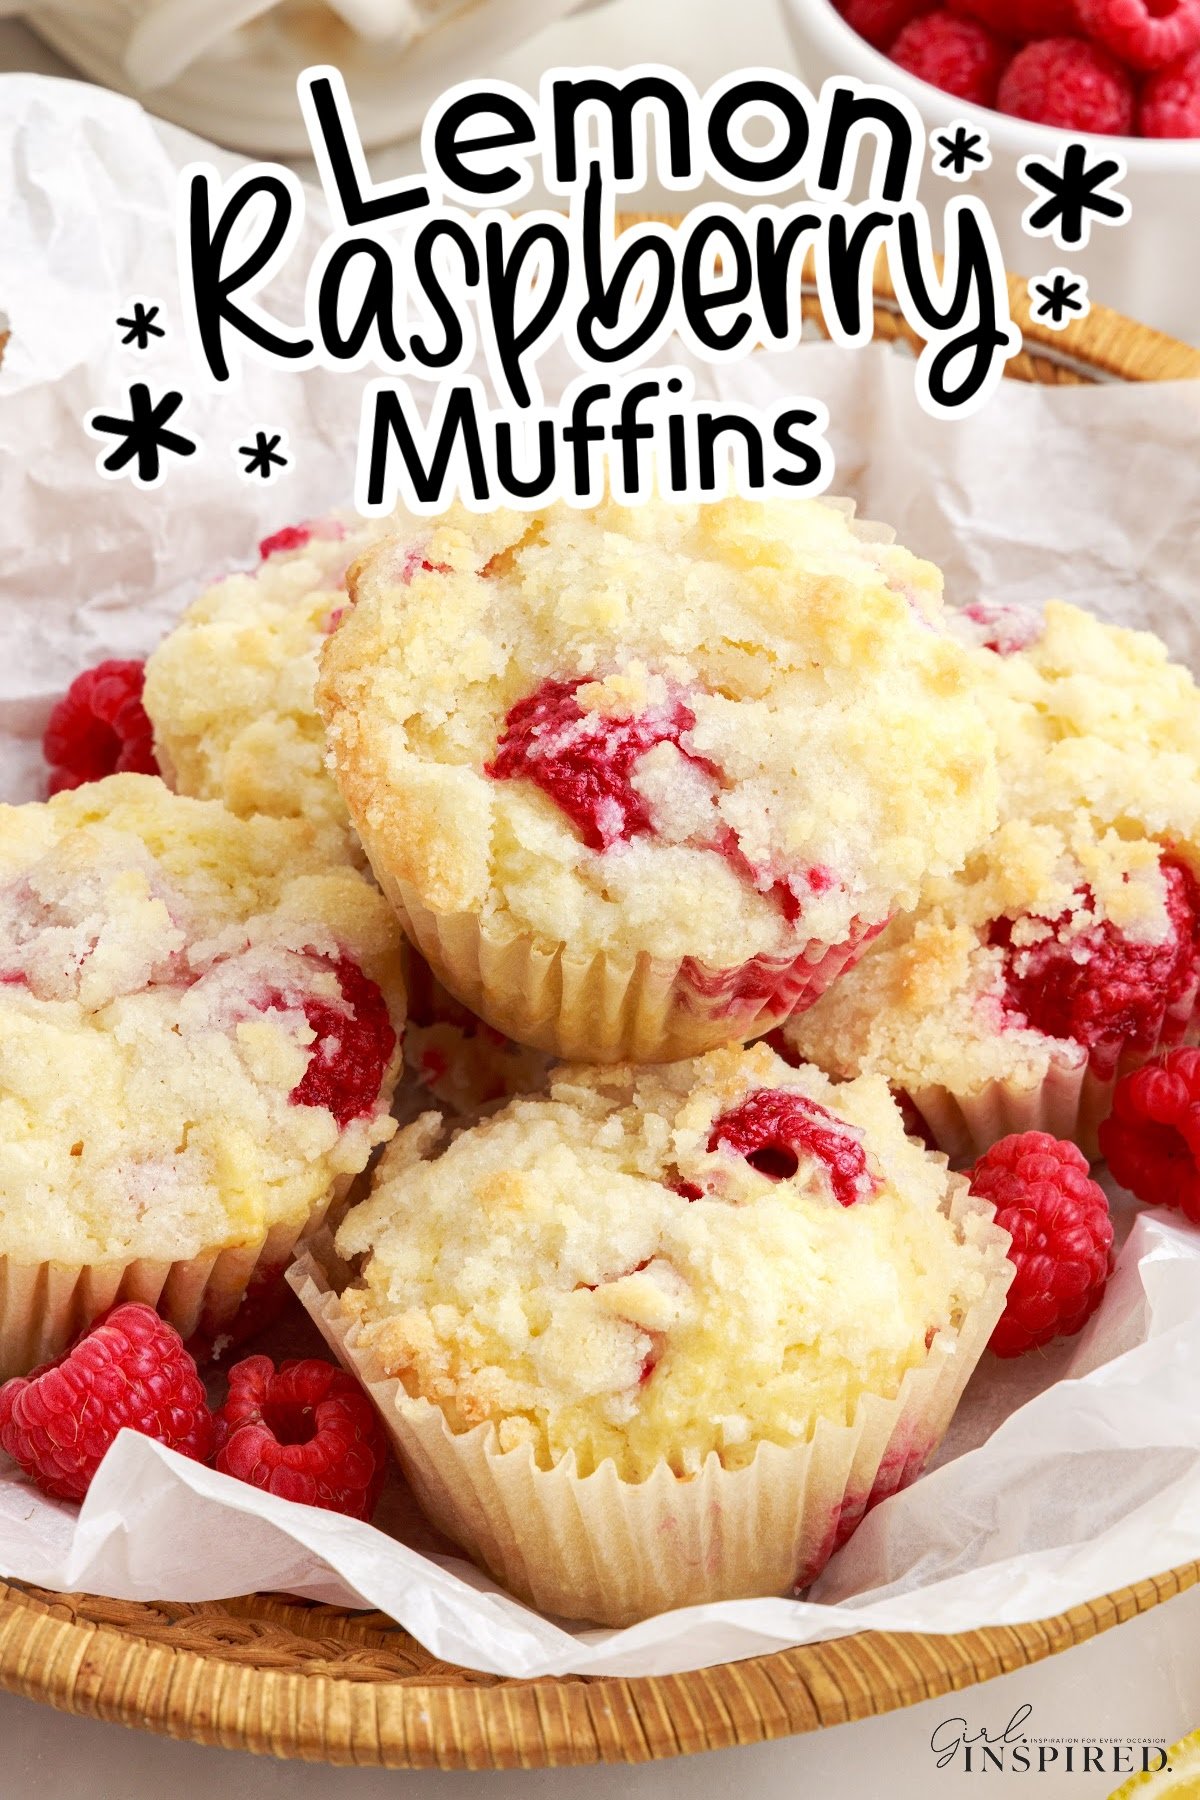 Pile of lemon raspberry muffins in a bread basket with text title overlay.